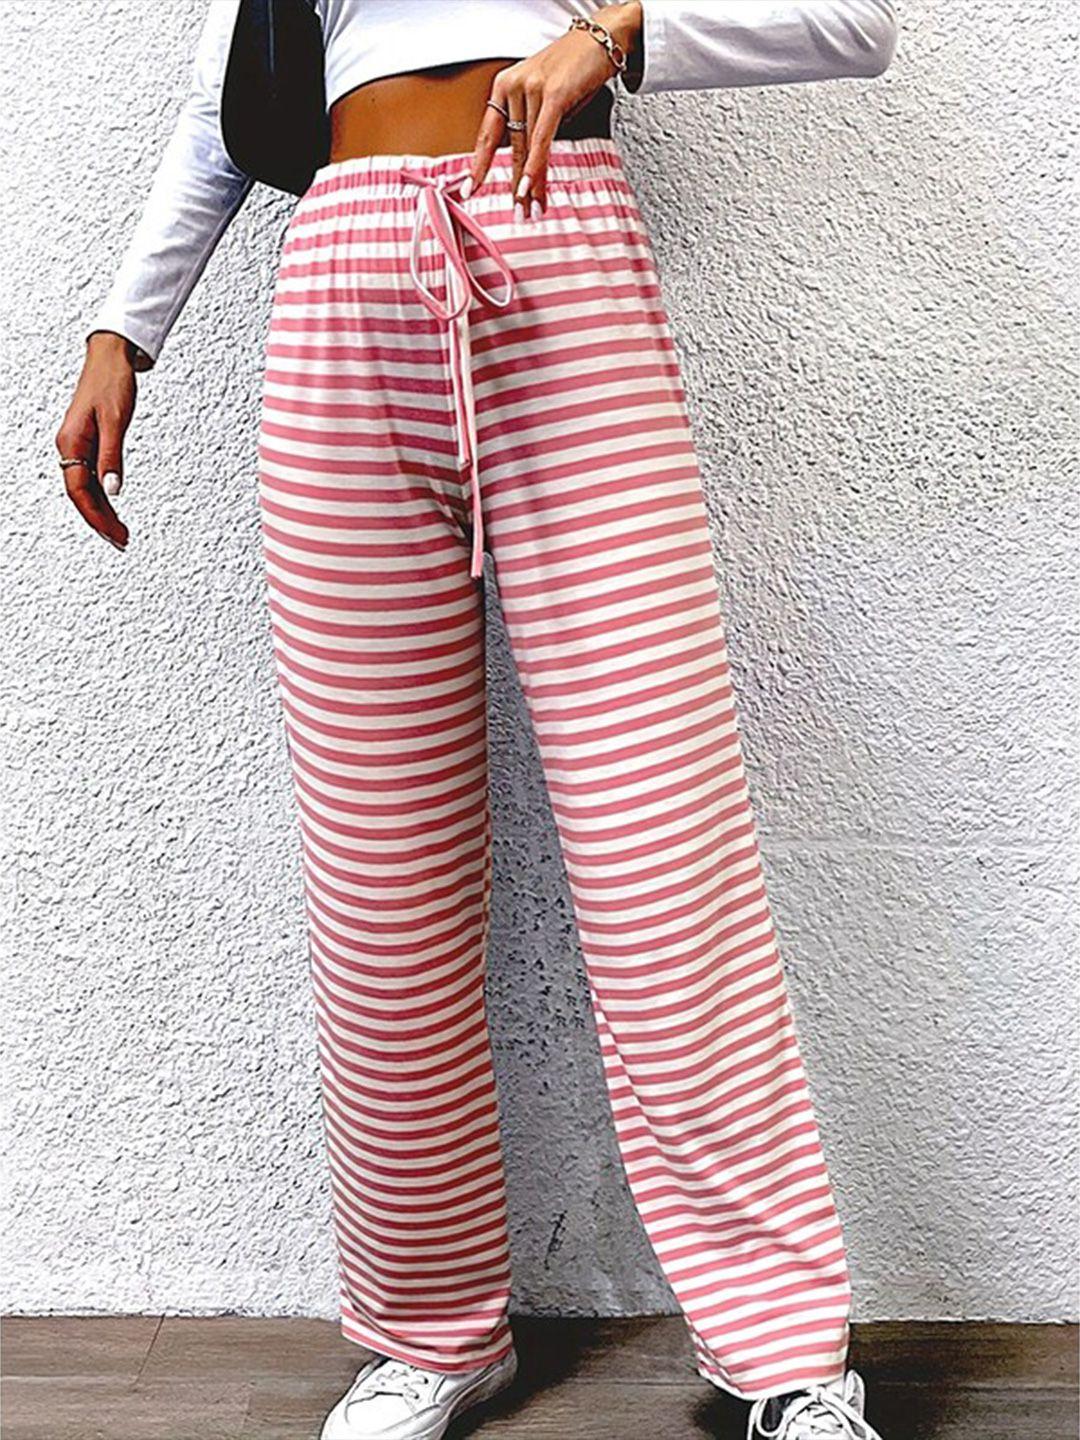 stylecast women pink striped high-rise easy wash trousers